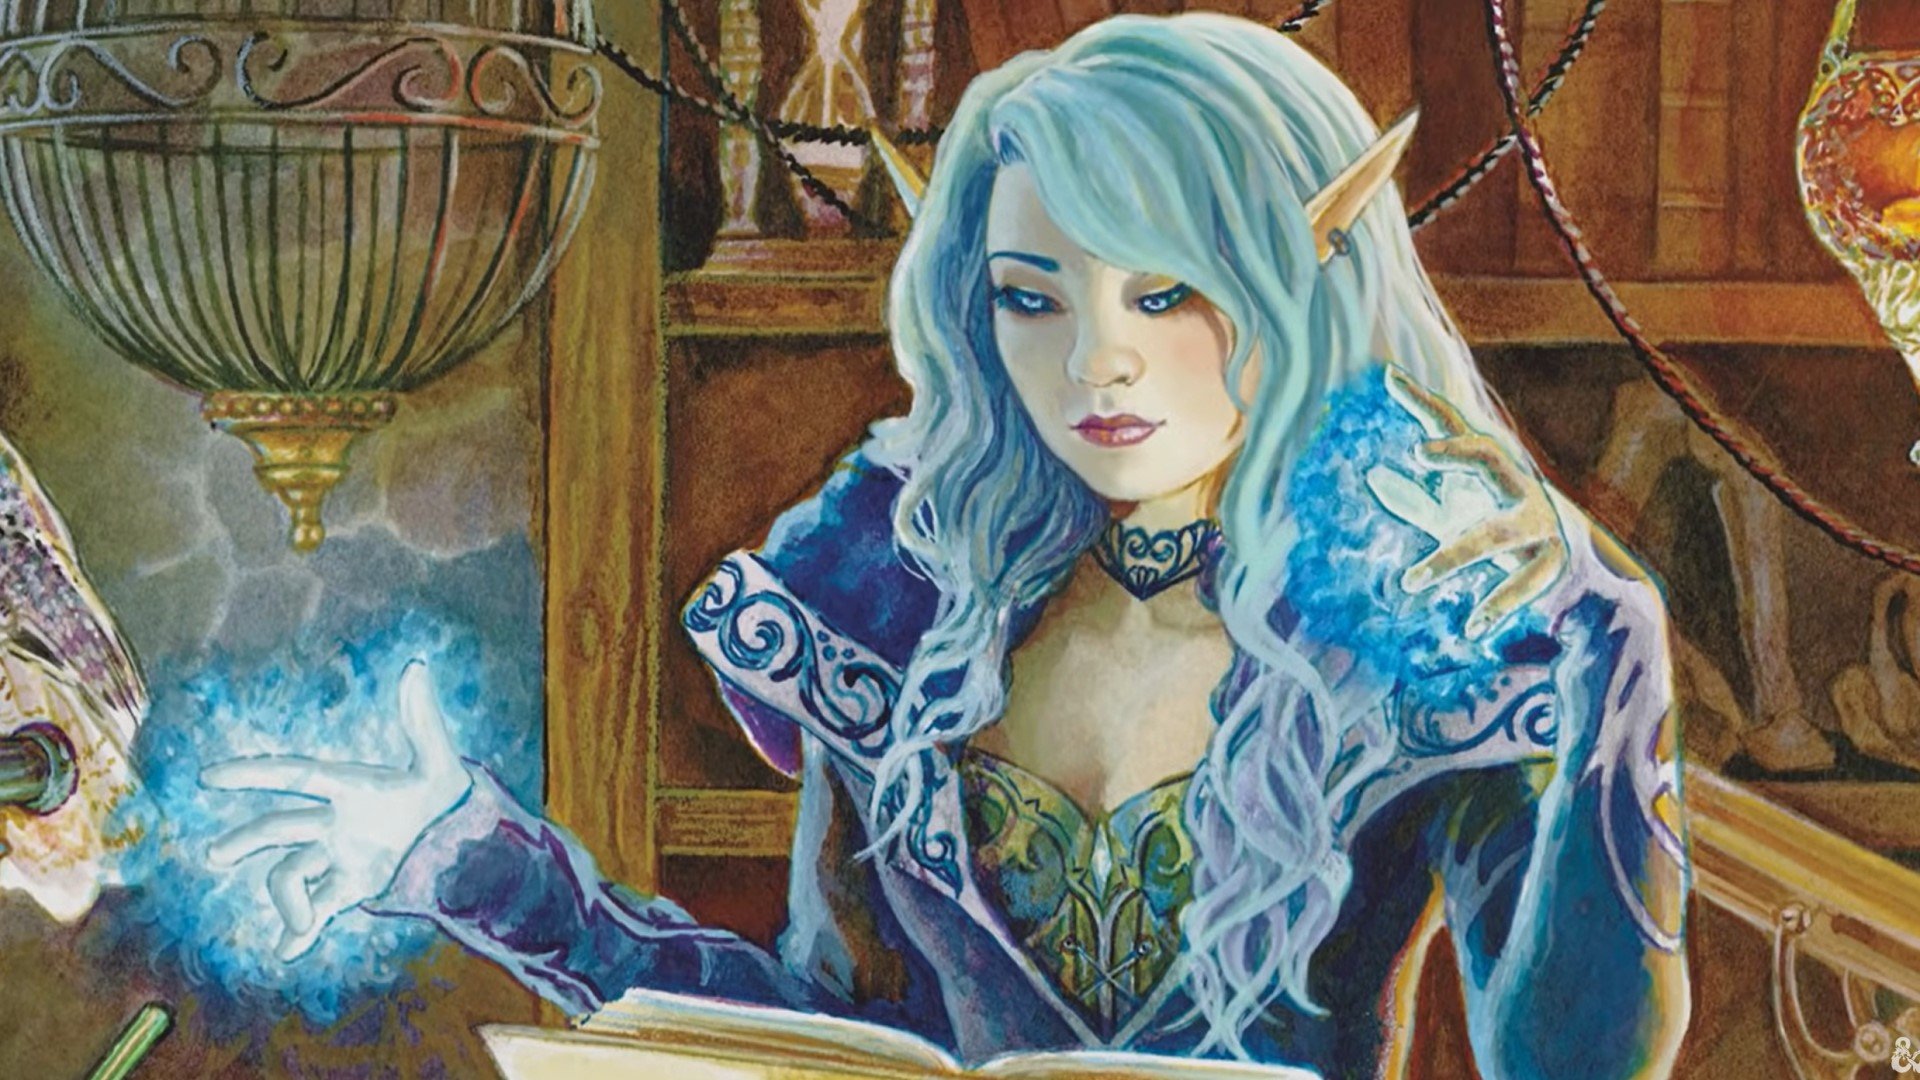 DnD how to be a DM - Wizards of the Coast art of an elf spellcaster